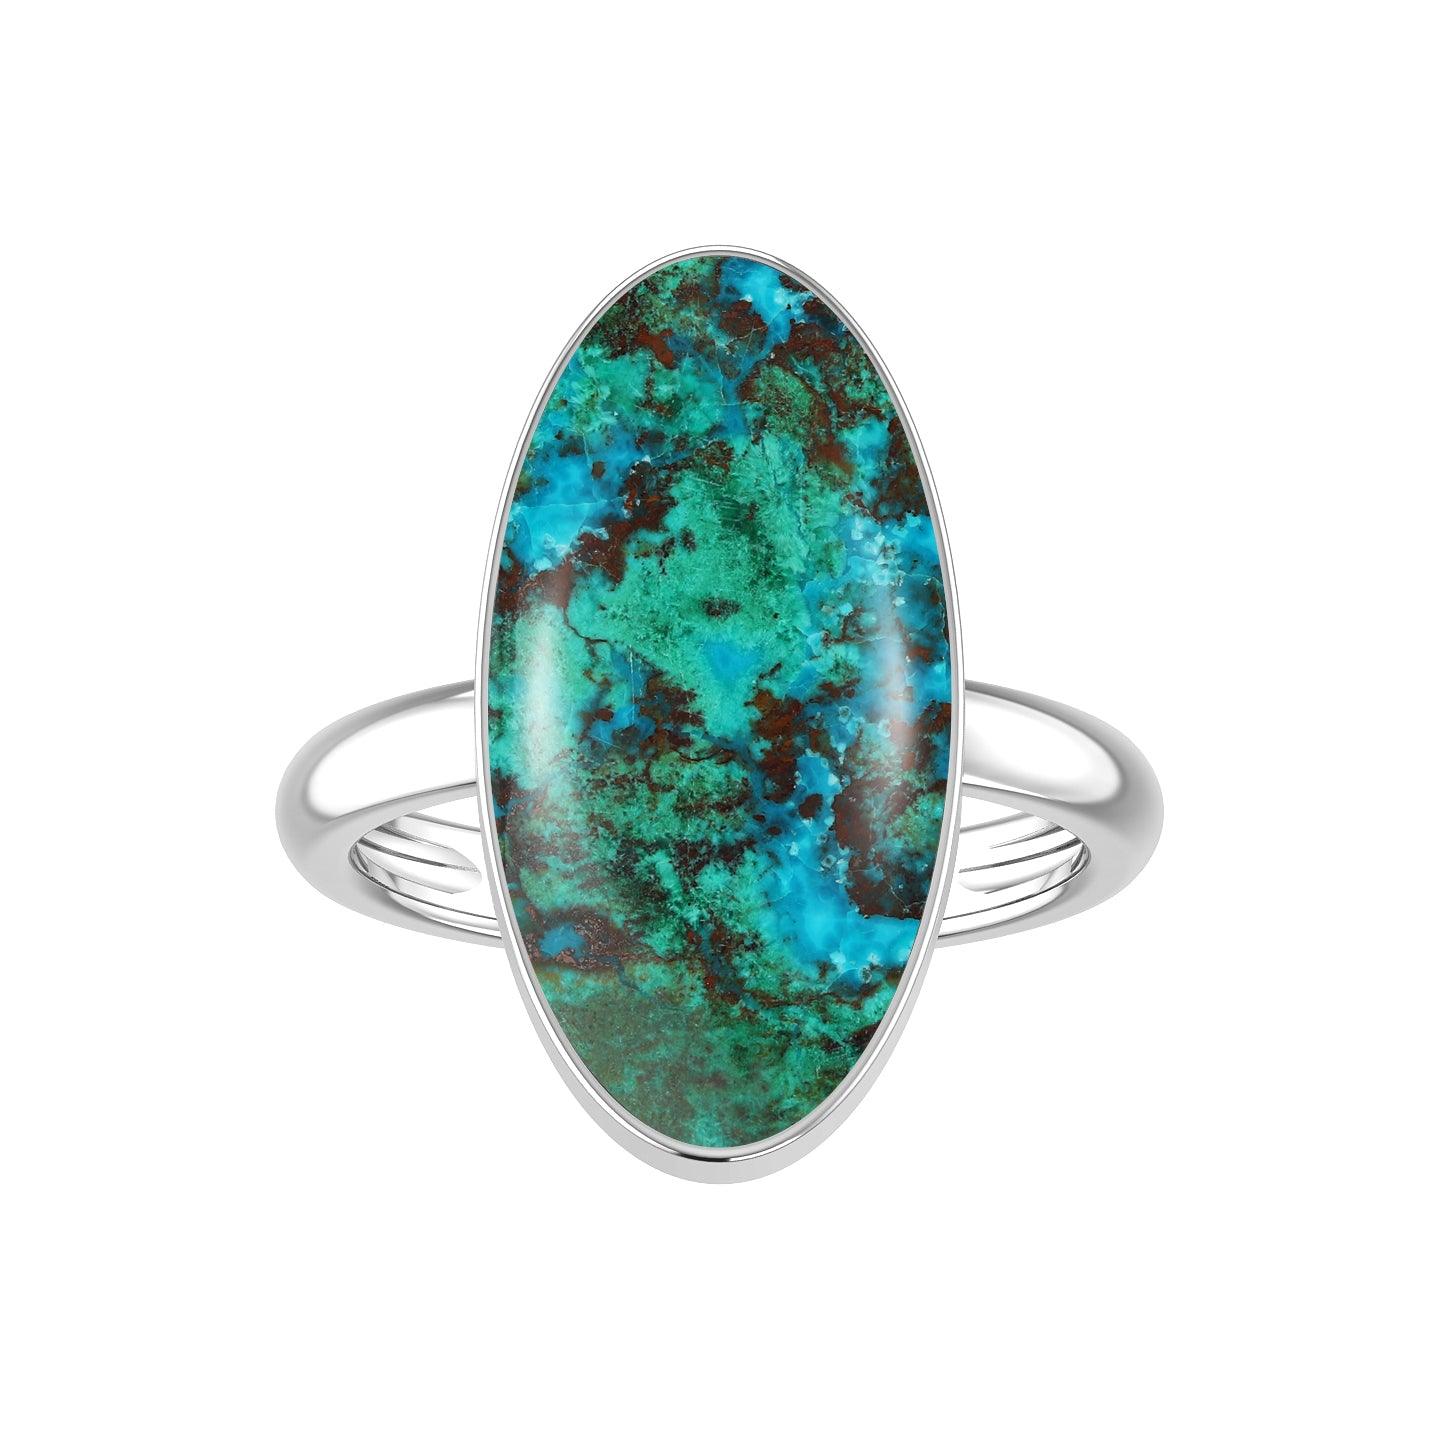 Natural Chrysocolla Ring 925 Sterling Silver Bezel Set Handmade Jewelry Pack of 6 - (Box 7)